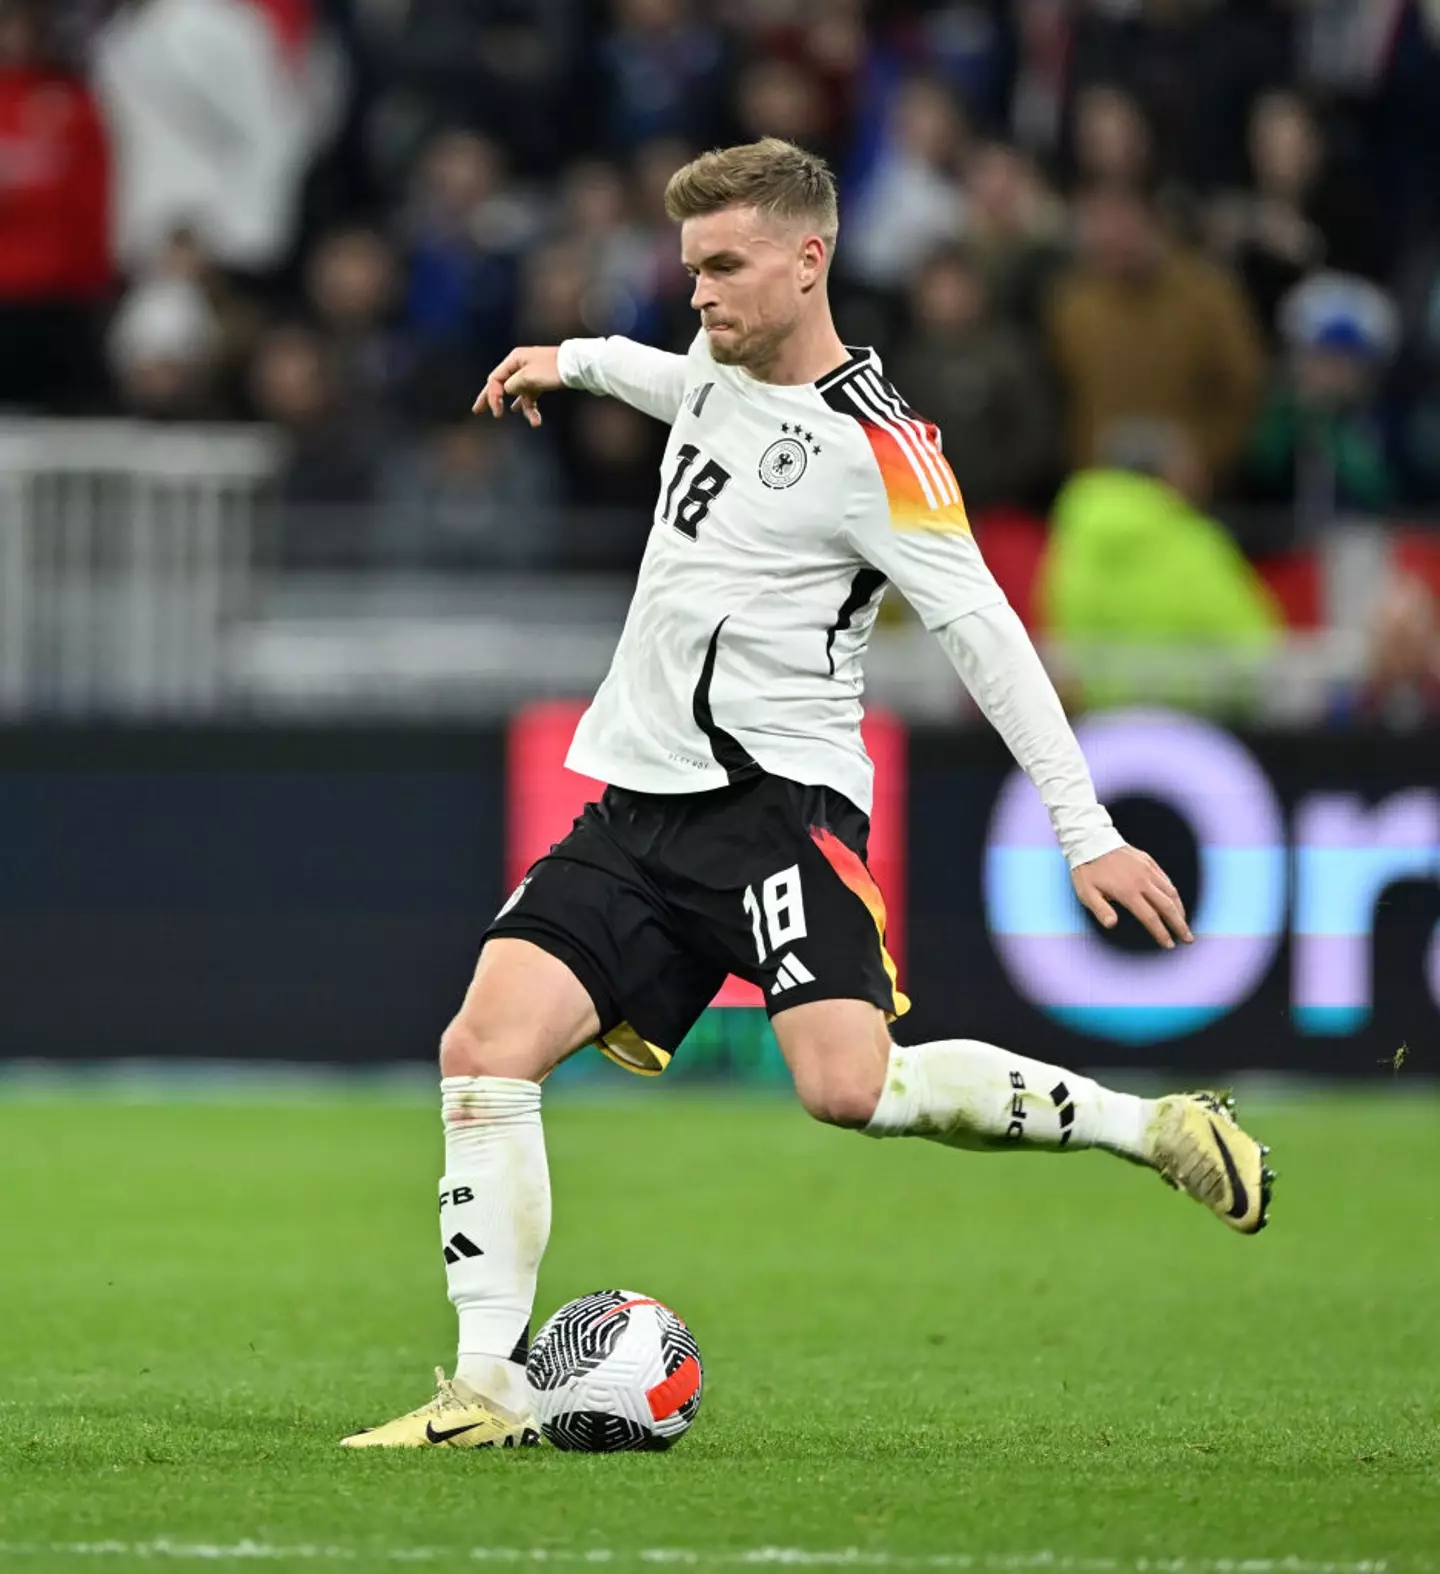 Germany traditionally play in white (Image: Getty)